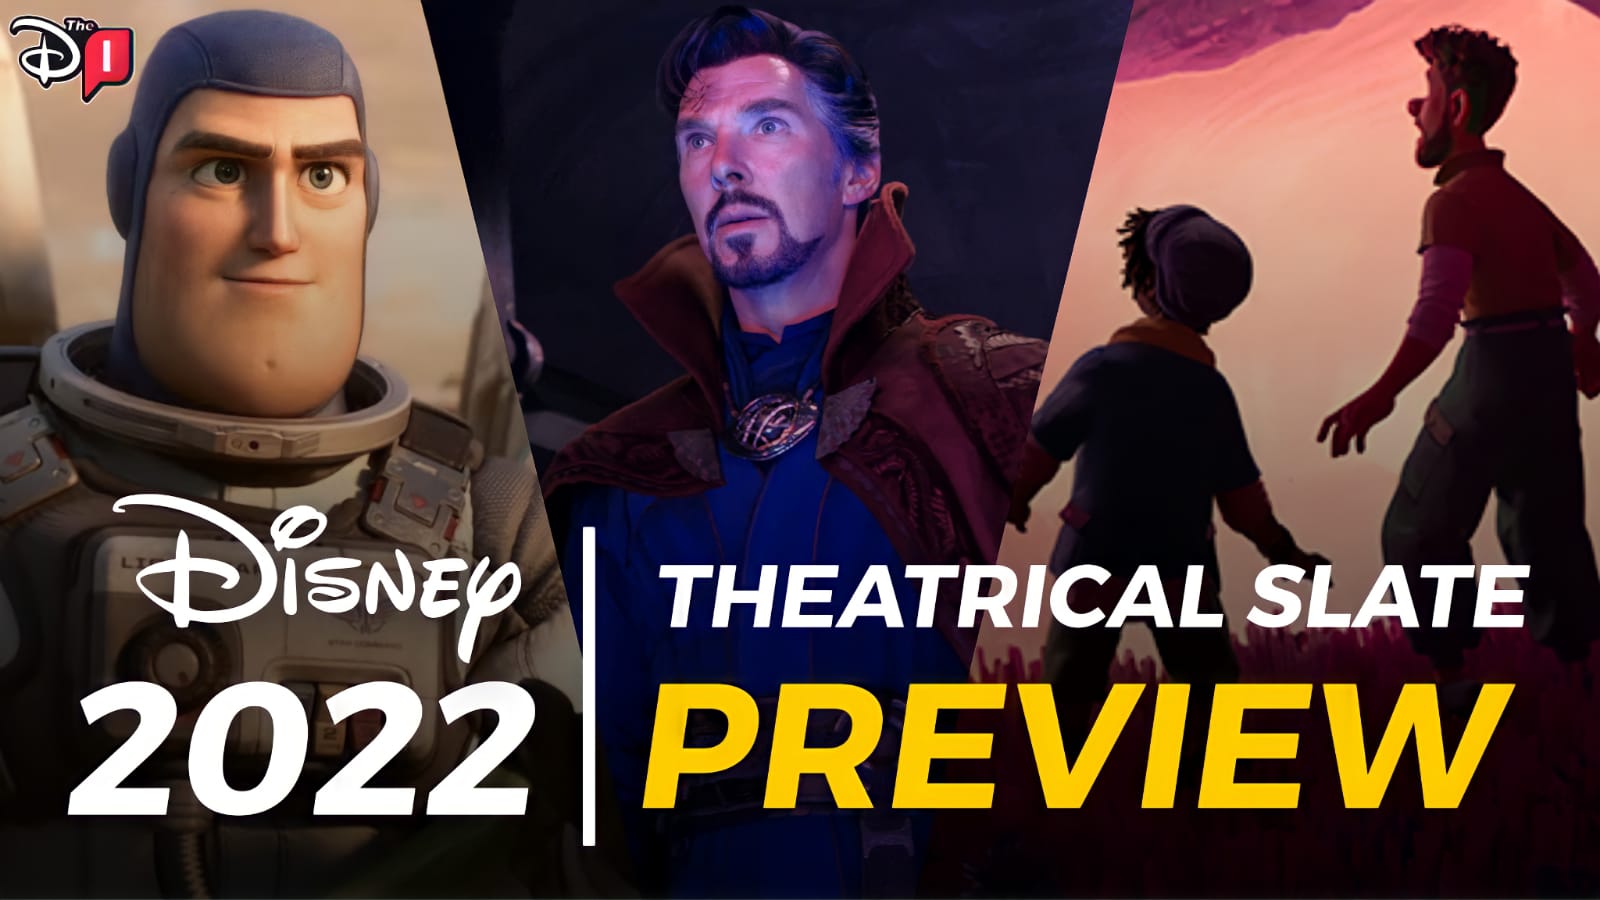 Disney’s 2022 Theatrical Slate Preview